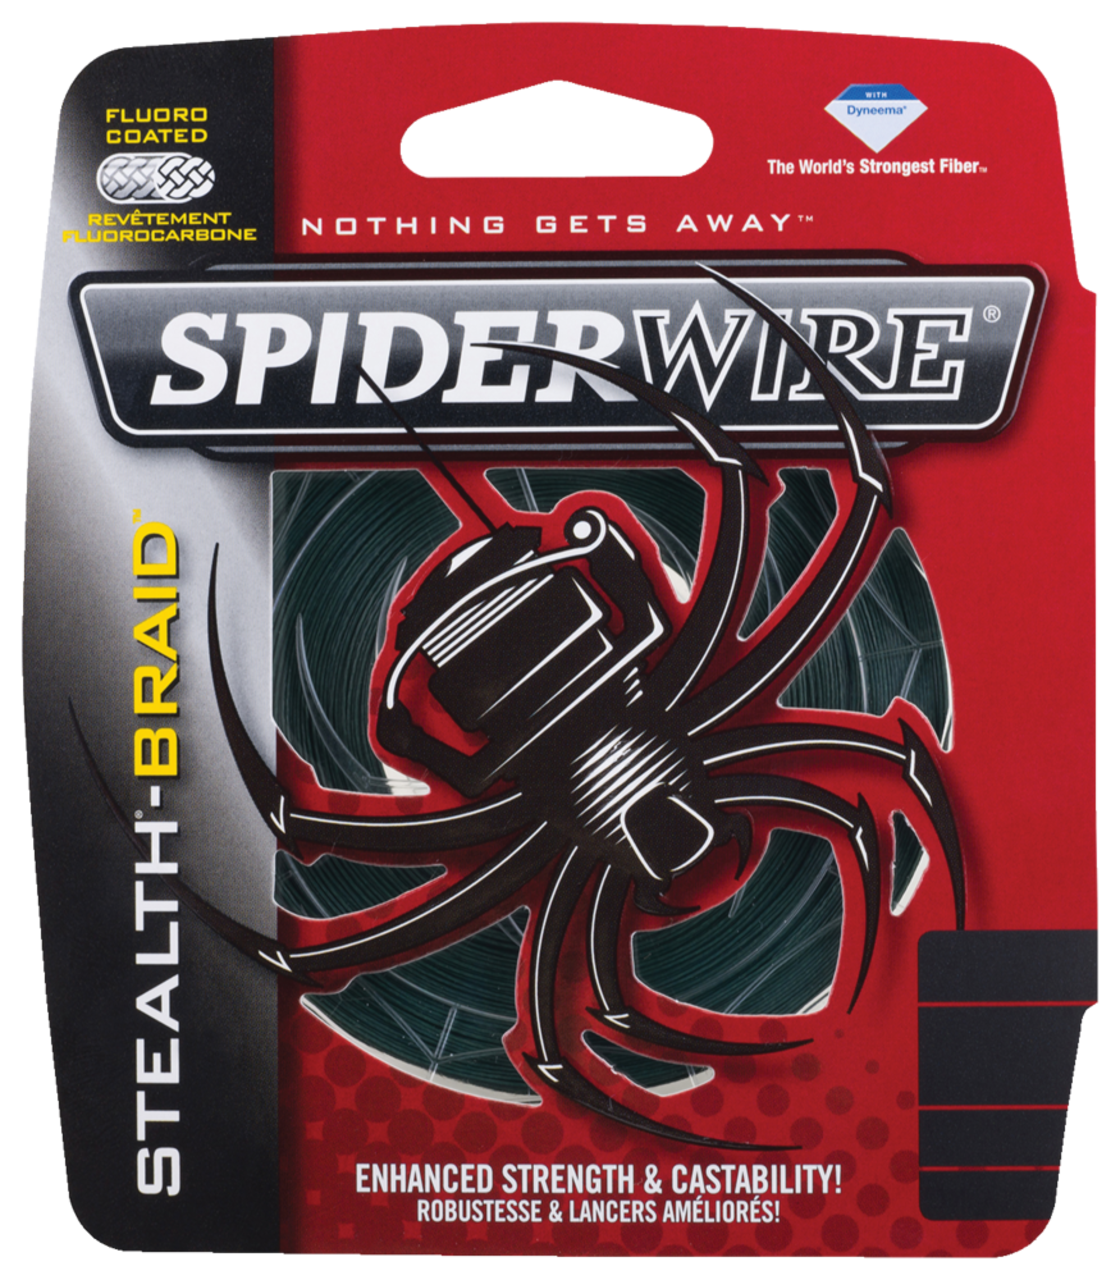 https://media-www.canadiantire.ca/product/playing/fishing/fishing-accessories/0787450/spiderwire-stealth-braid-moss-green-10lb-125-yards-e2cbdda6-7e92-4744-bdfb-a7fd3476876a.png?imdensity=1&imwidth=640&impolicy=mZoom